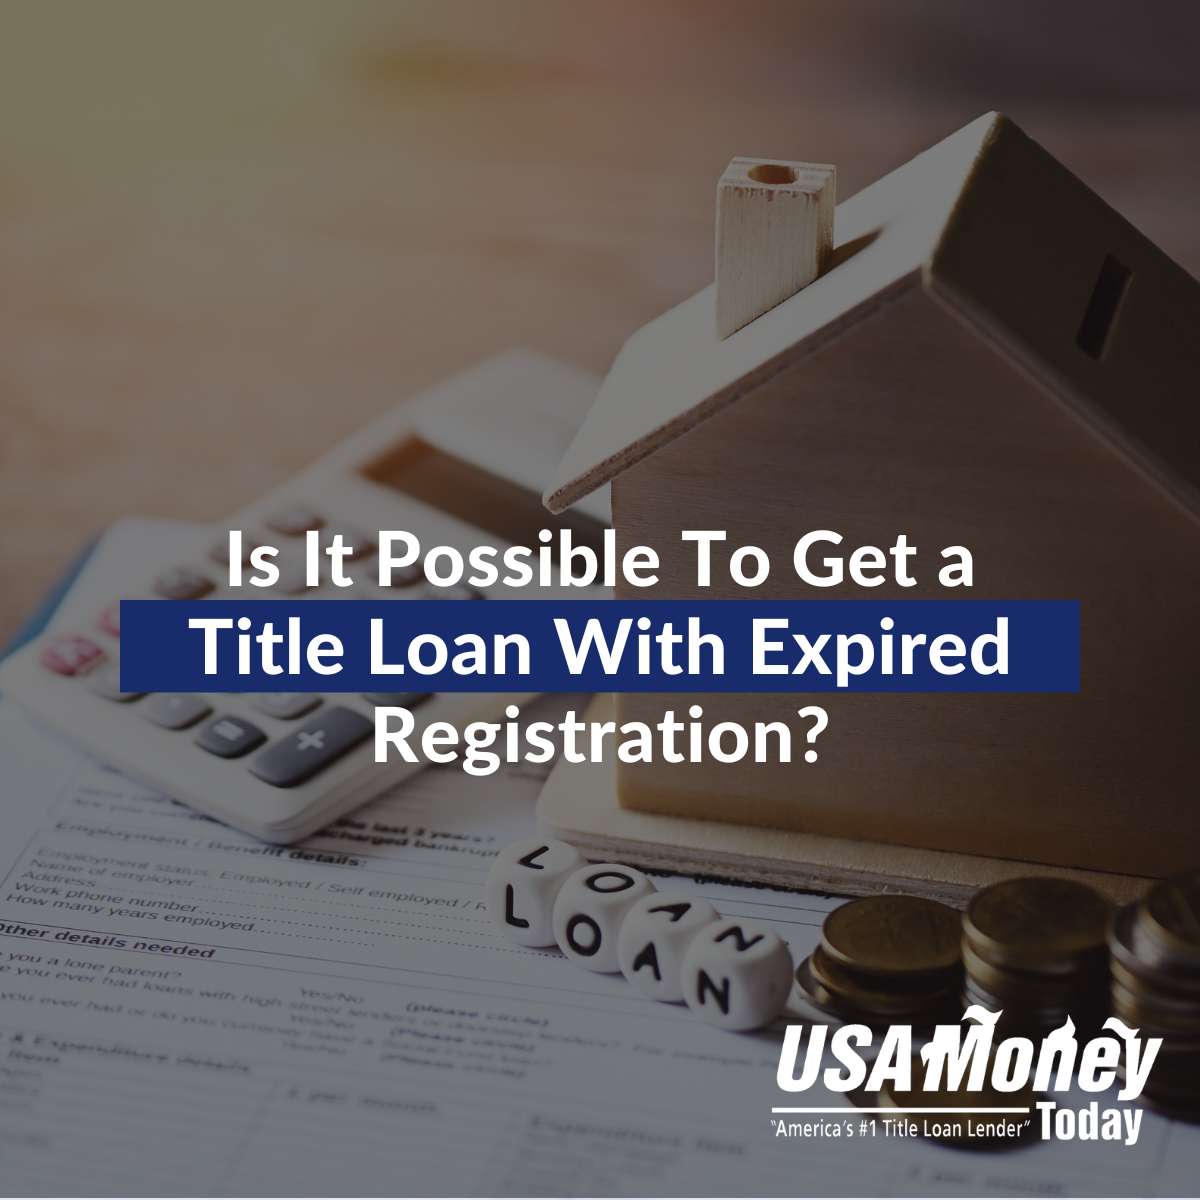 Is It Possible To Get a Title Loan With Expired Registration